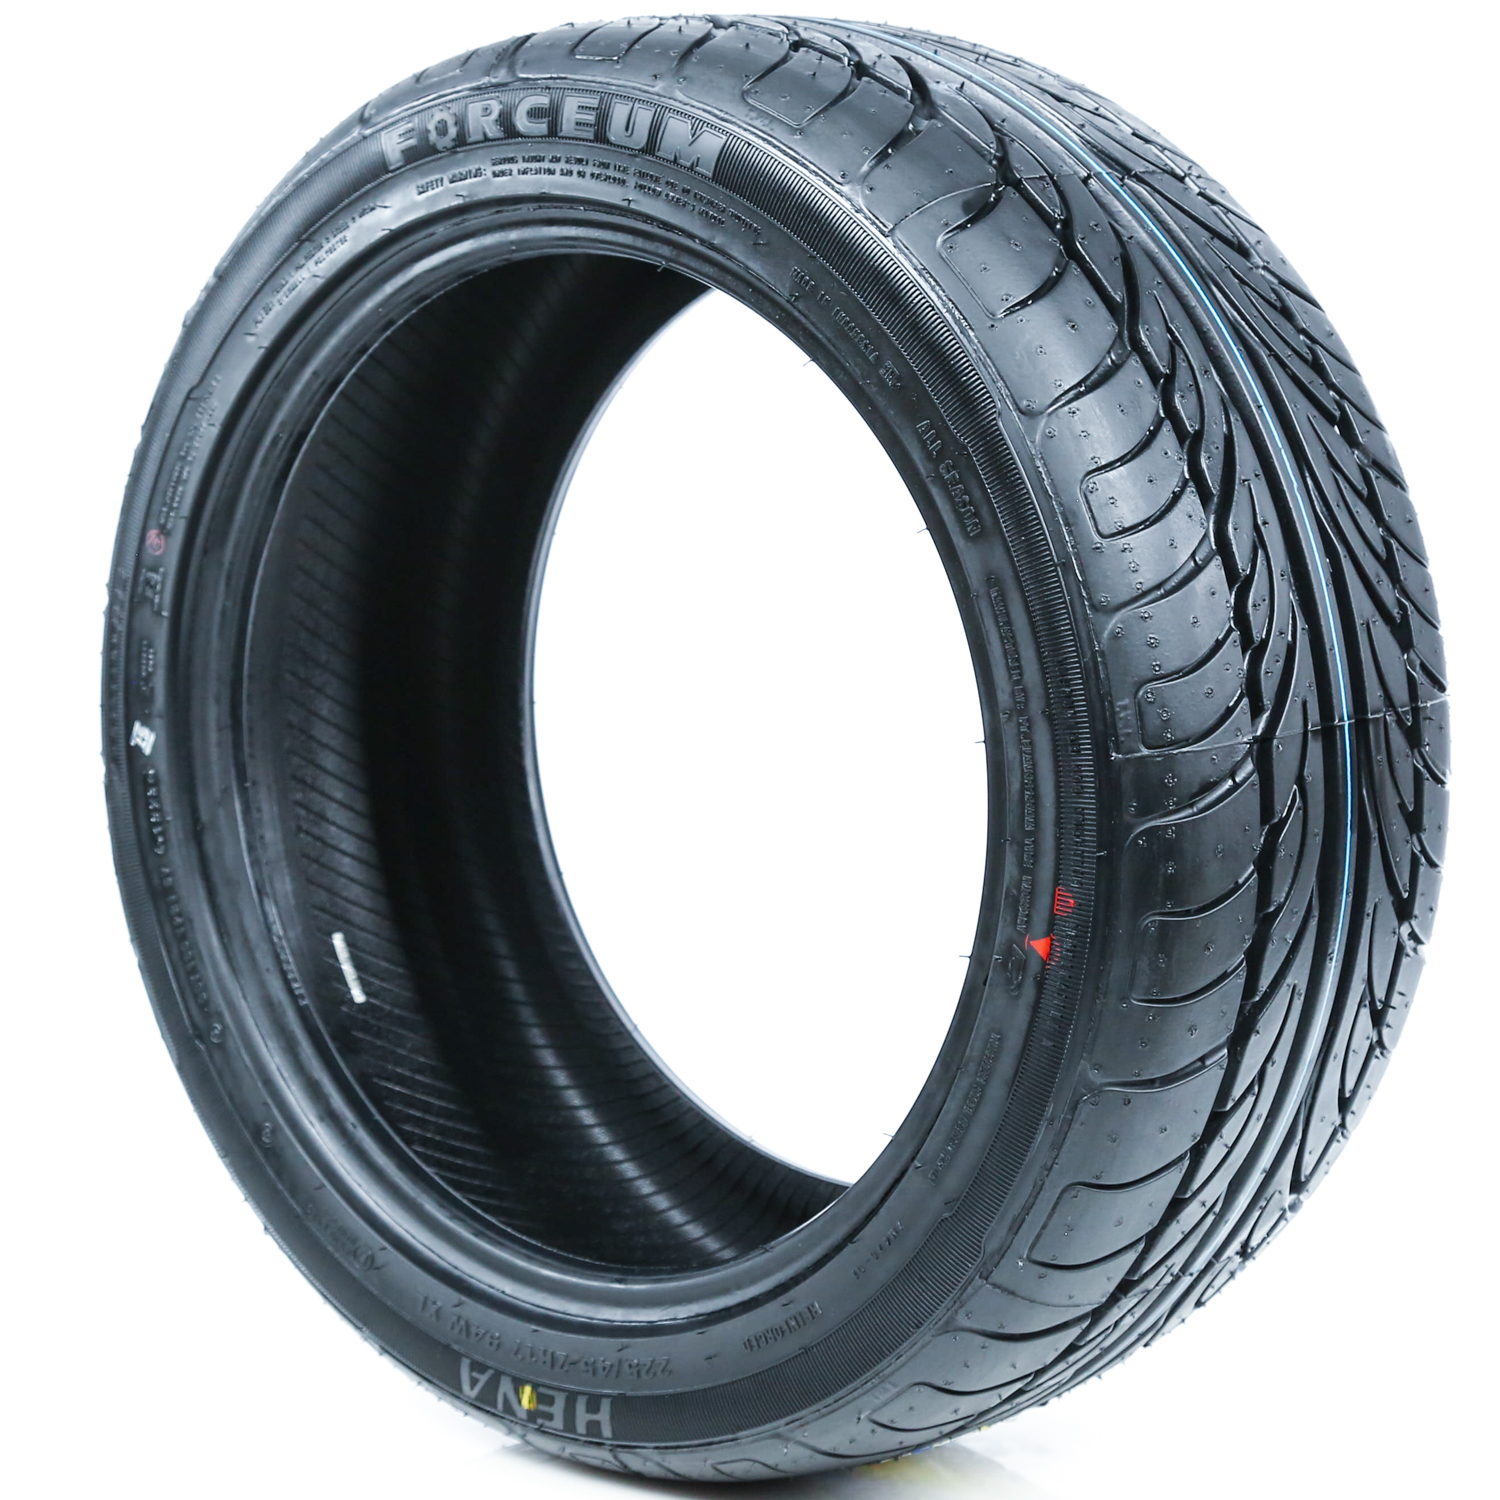 4 Tires Forceum Hena Steel Belted 225/45R17 ZR 94W XL A/S High Performance